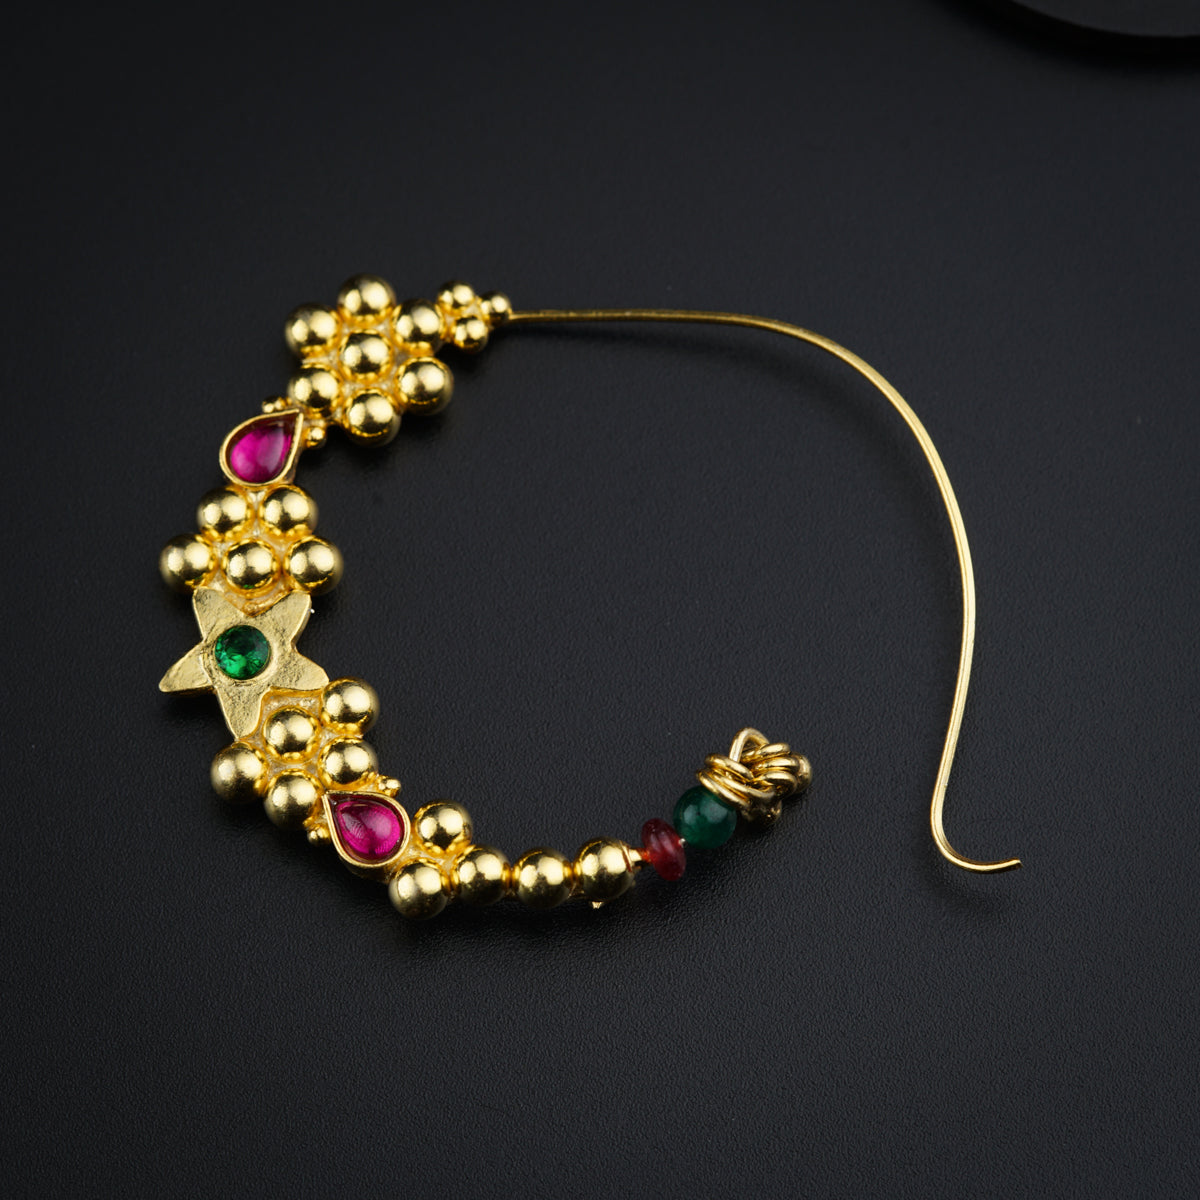 a close up of a gold bracelet with beads